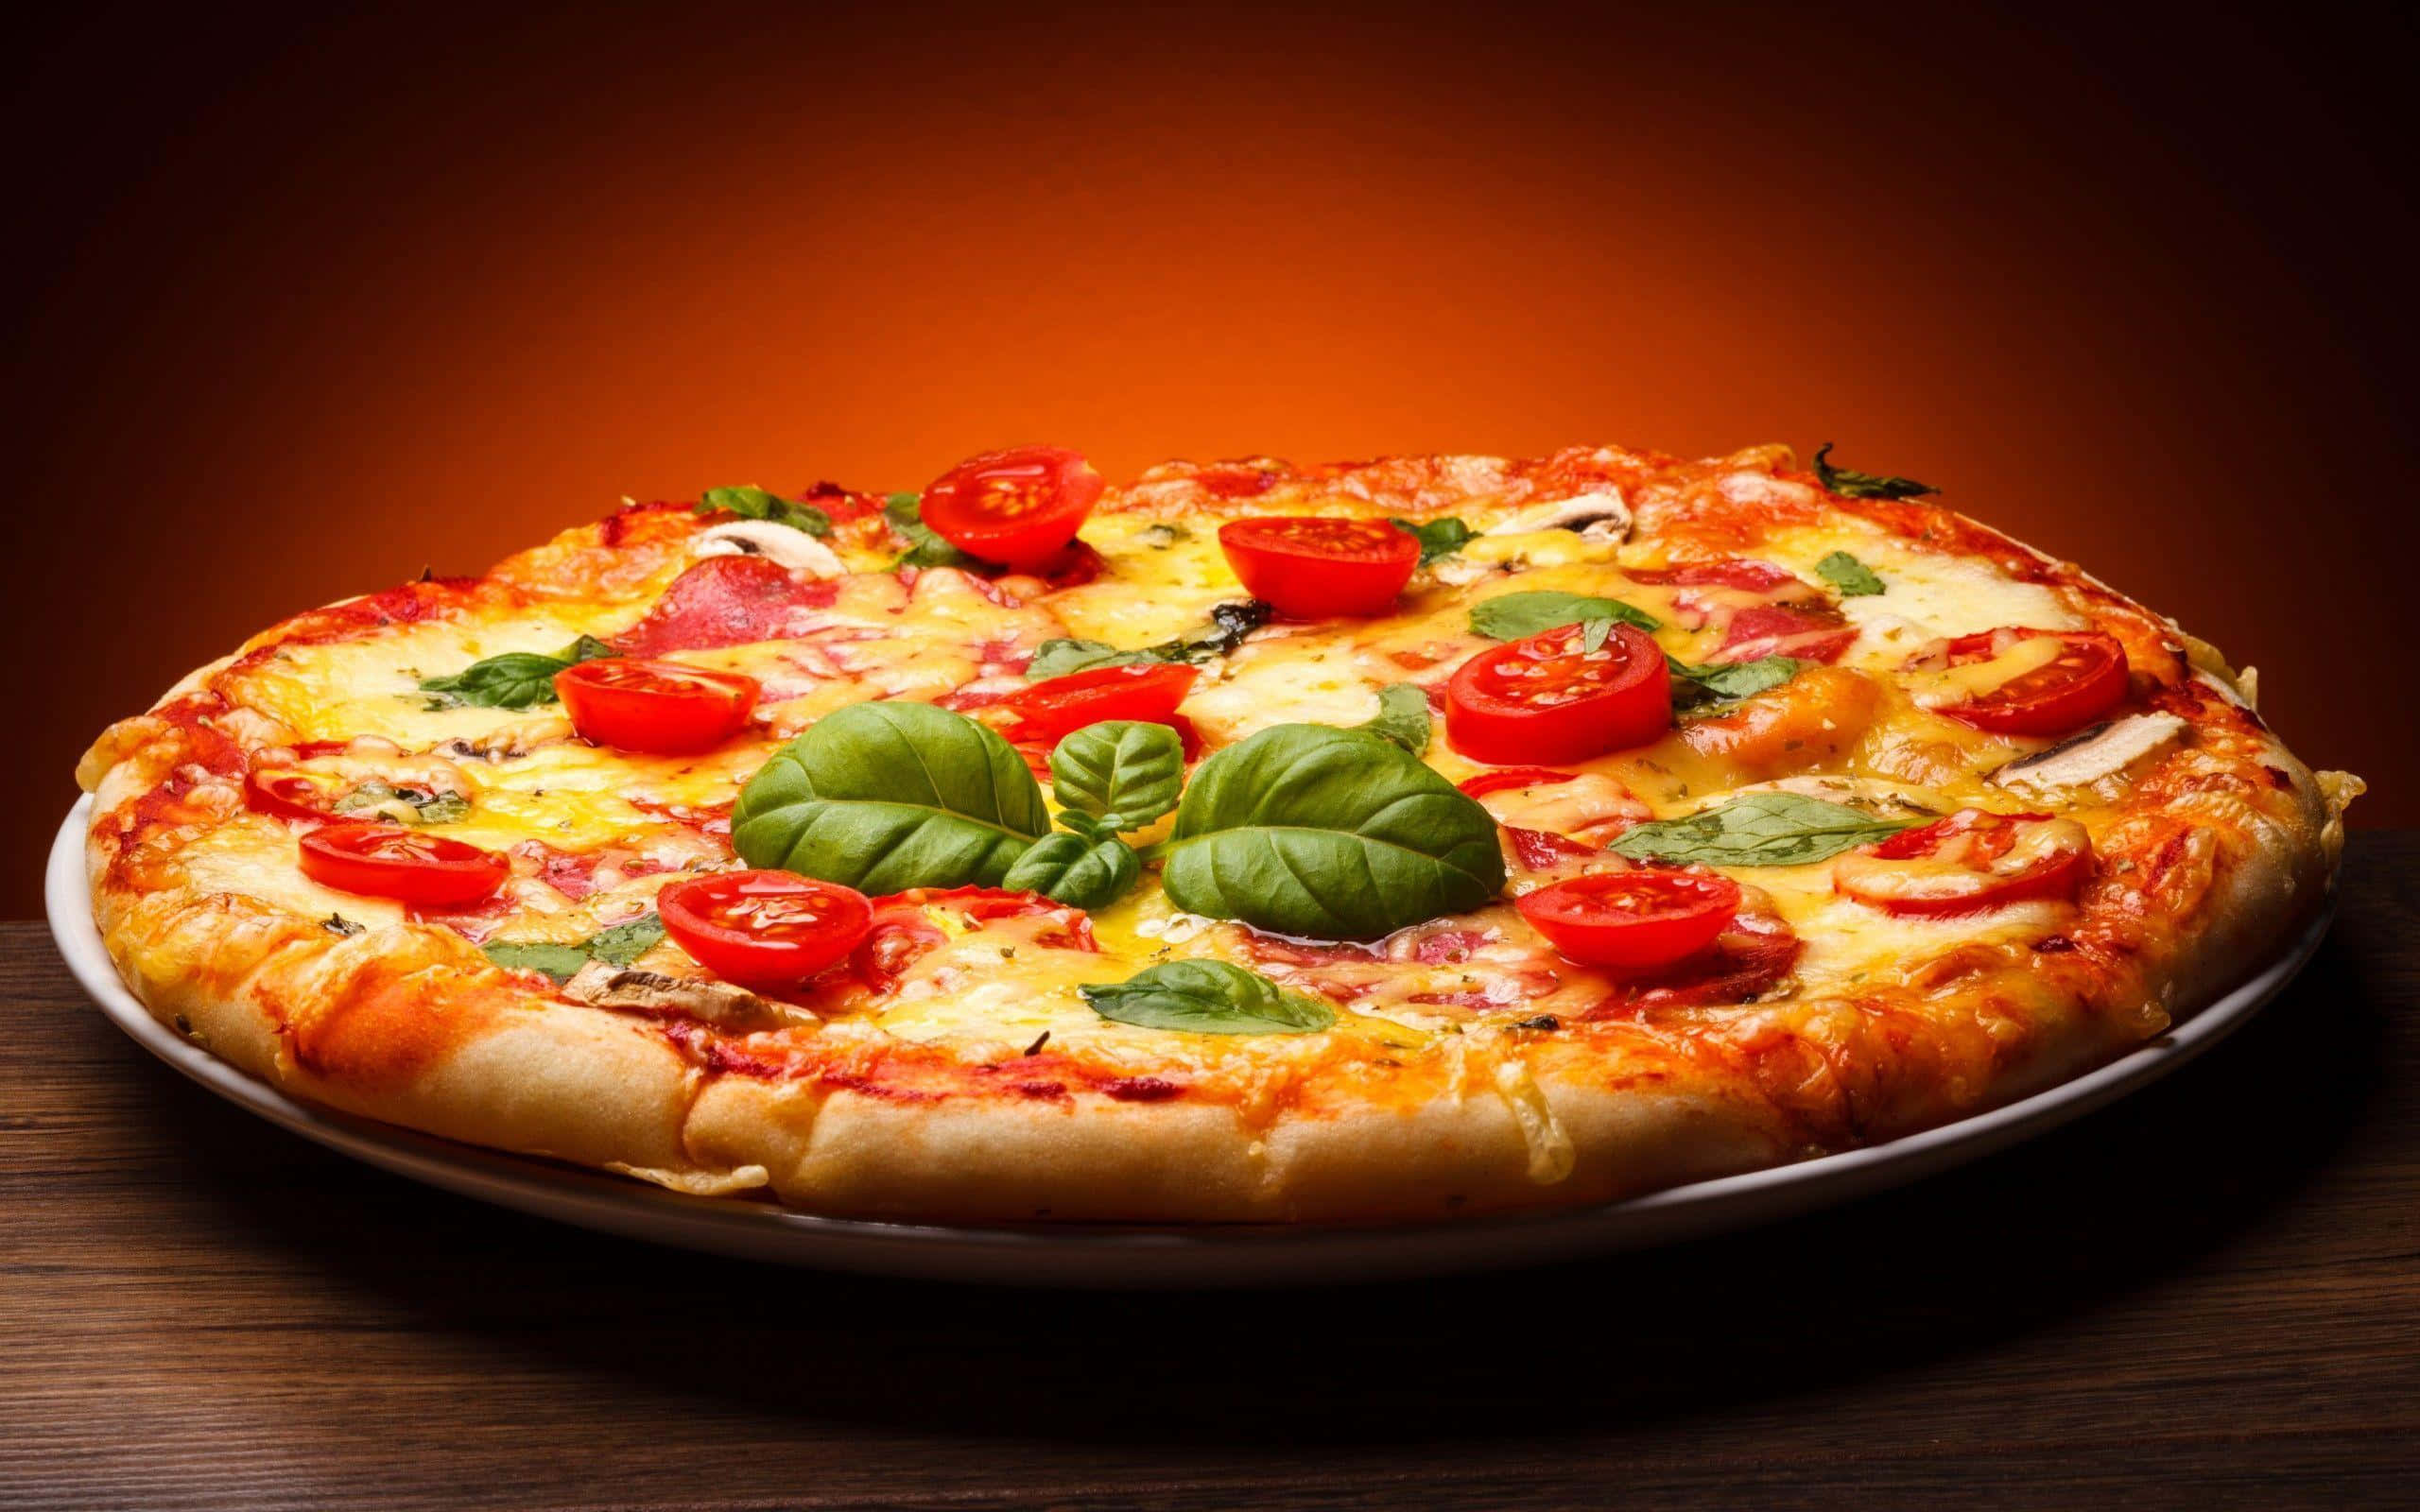 Delicious pizzas available at Pizza Hut